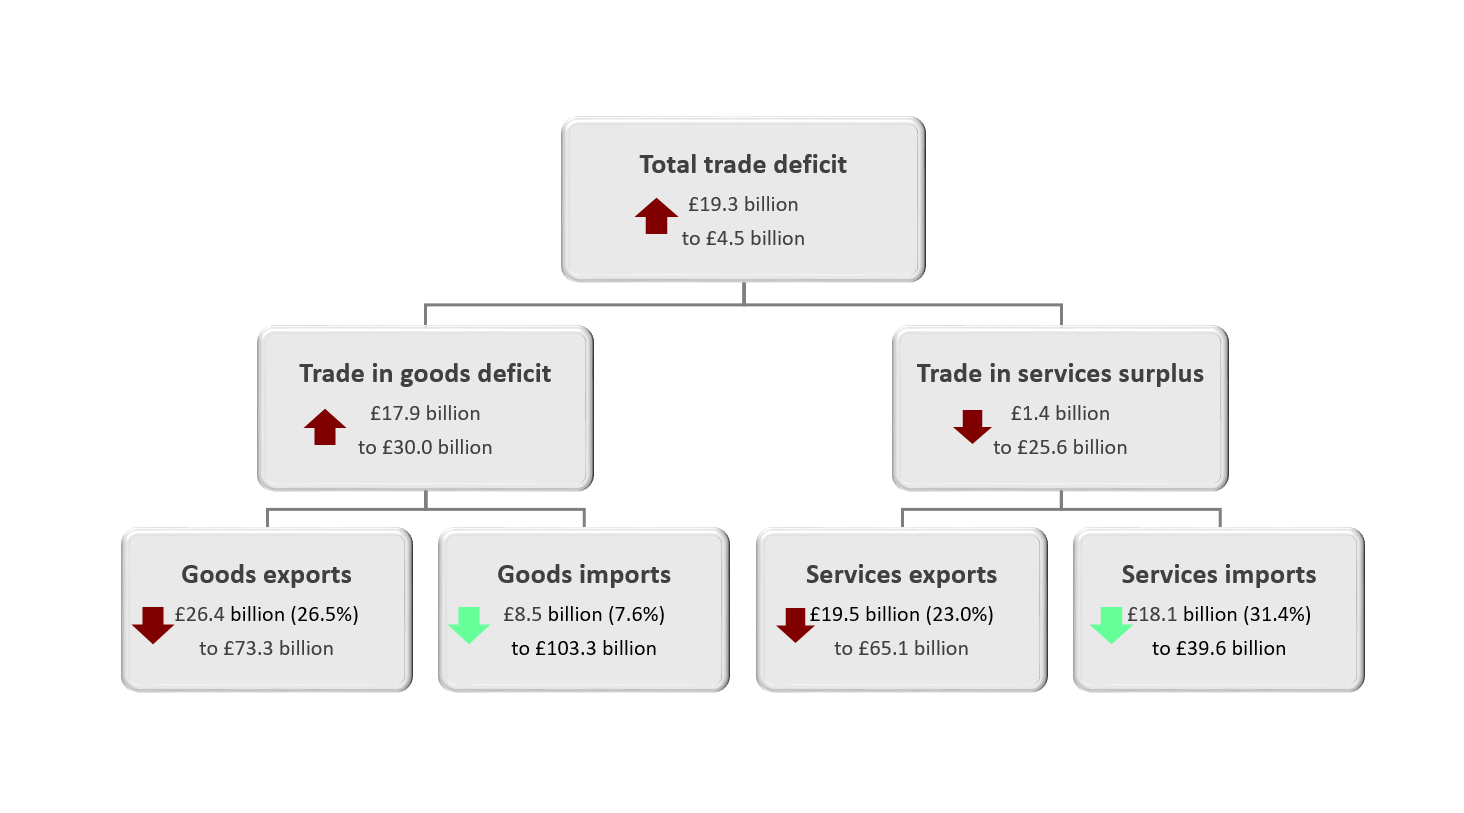 Including precious metals, the total trade balance decreased by £19.3 billion to a deficit of £4.5 billion in the three months to April 2020, driven by a widening of the trade in goods deficit.